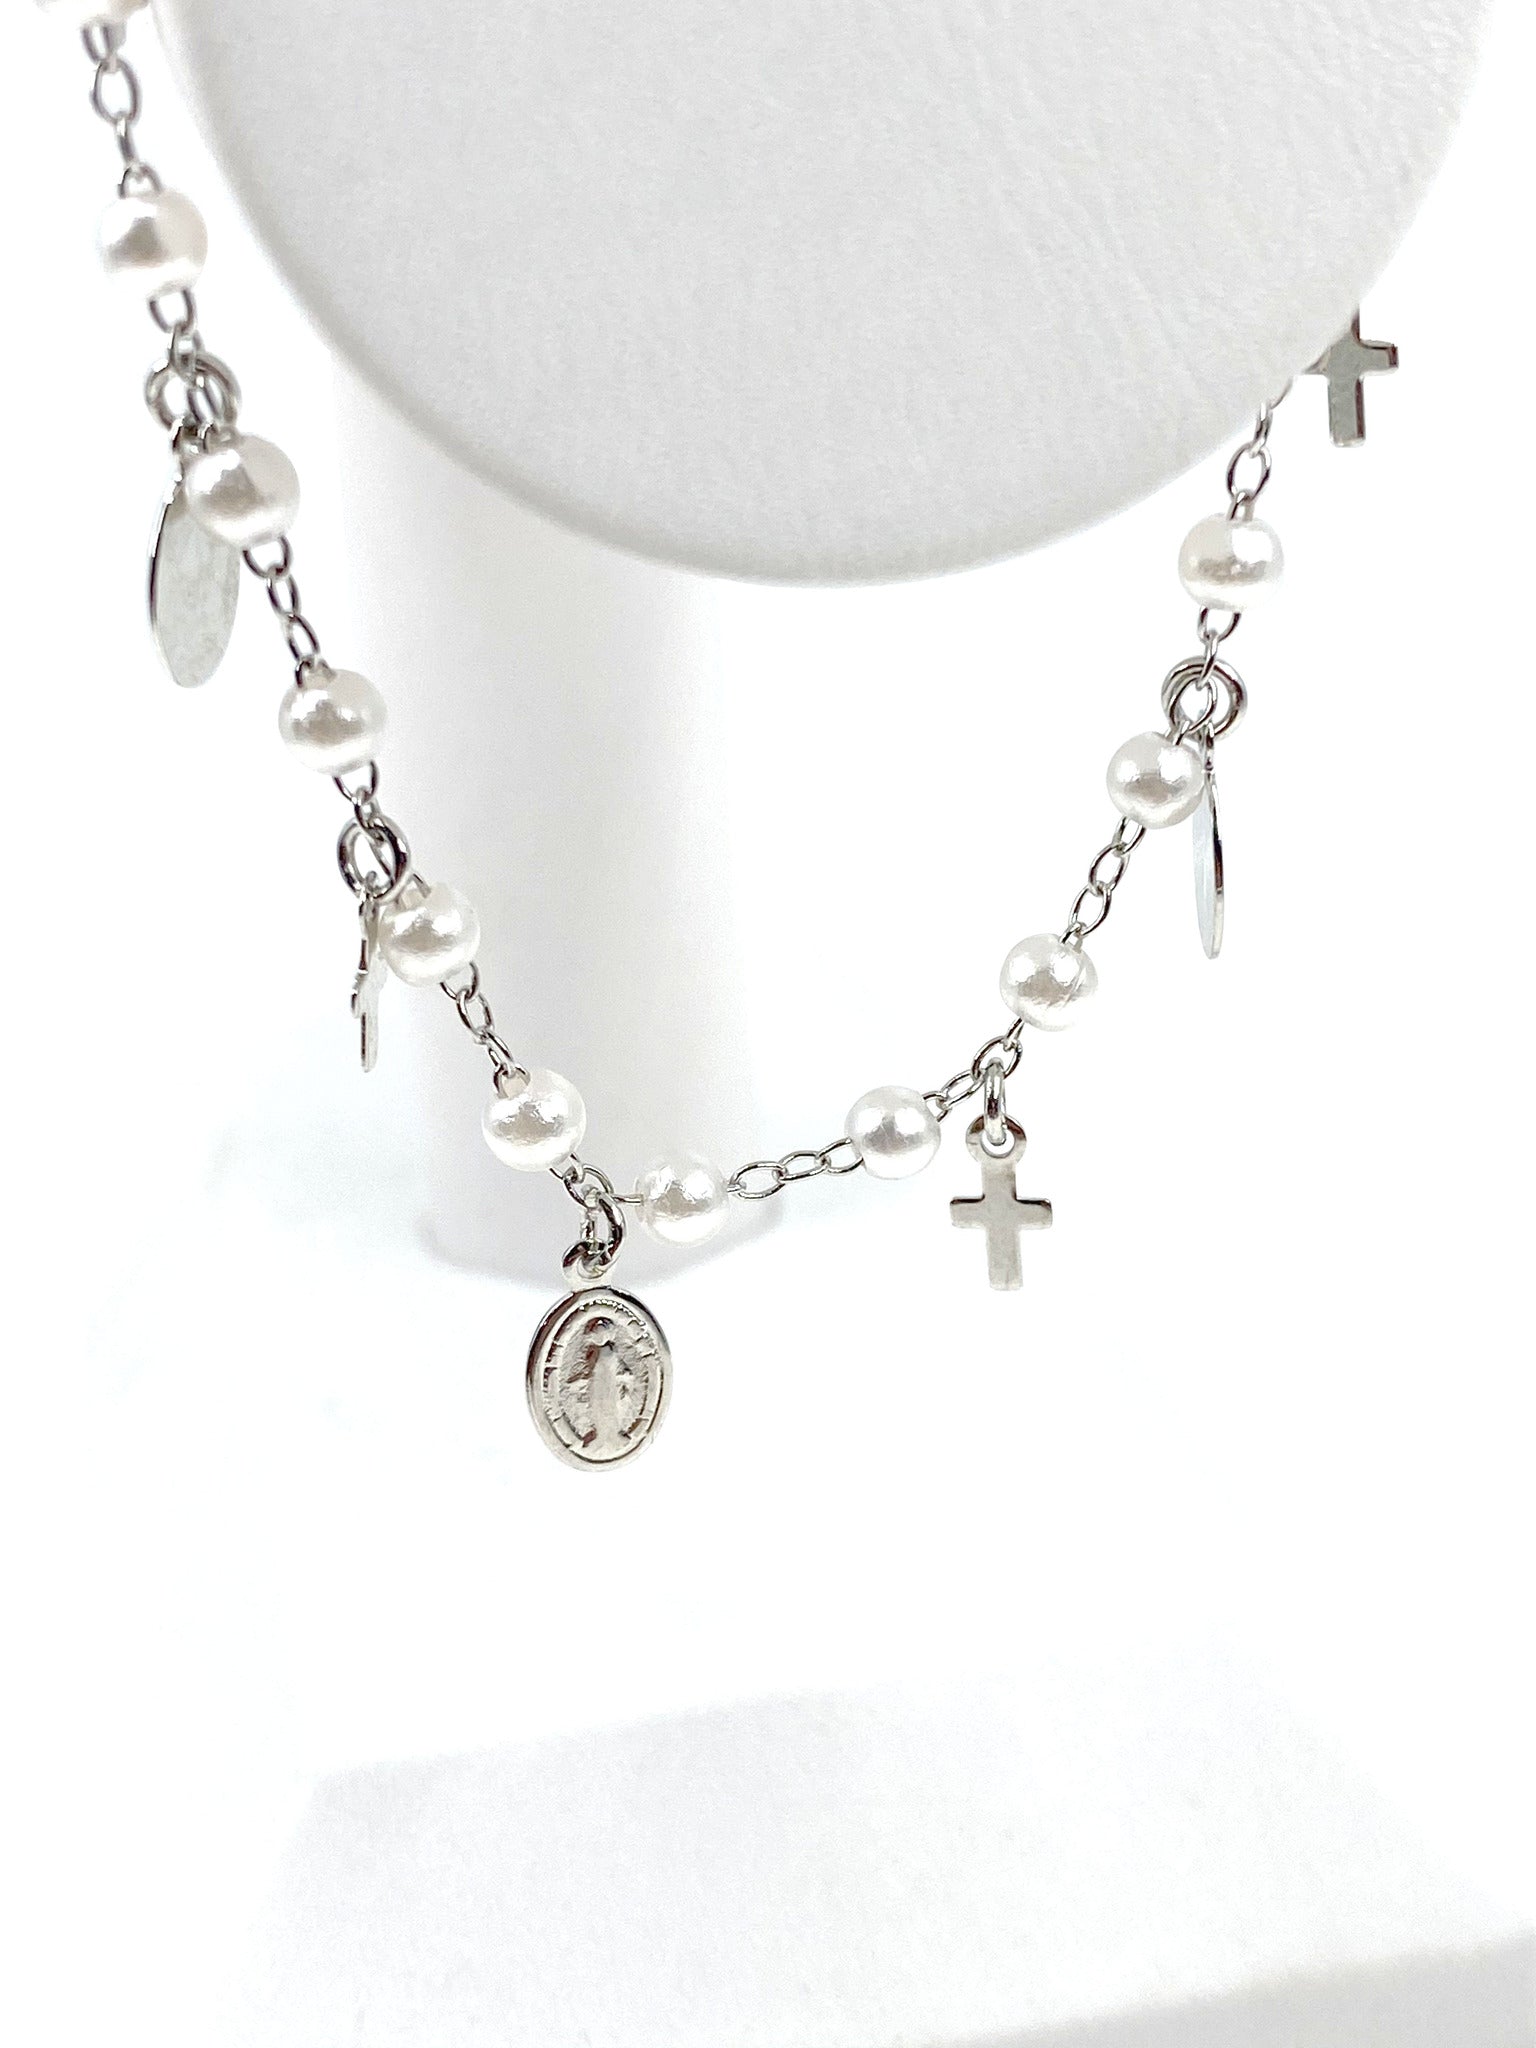 Bracelet  with simulated pearls and Our Lady of Grace and crosses charms